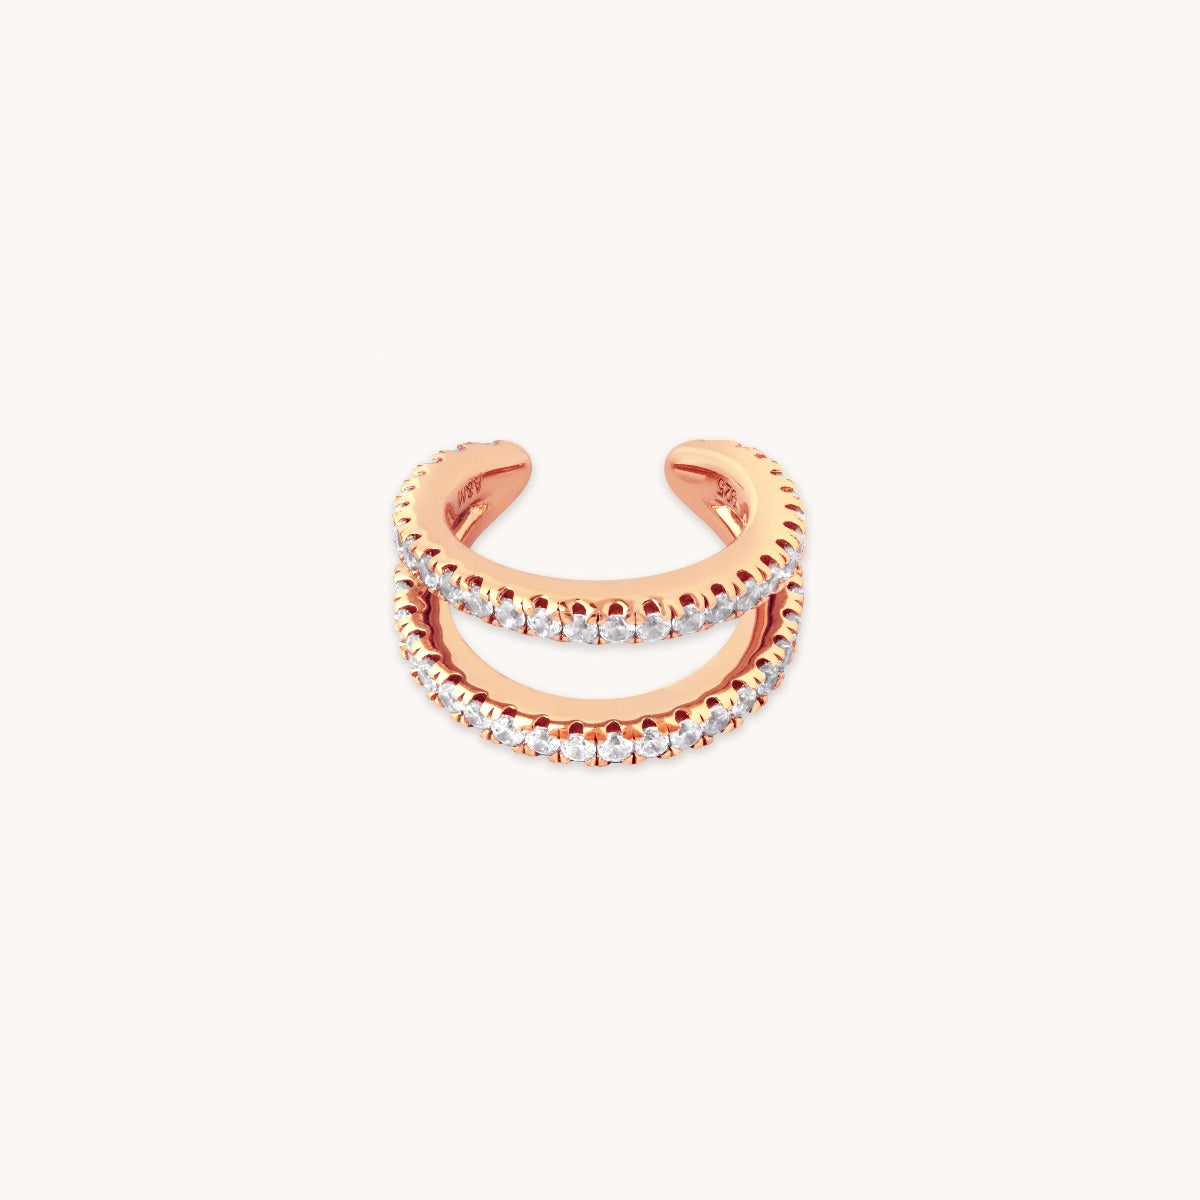 Illusion Double Crystal Ear Cuff in Rose Gold